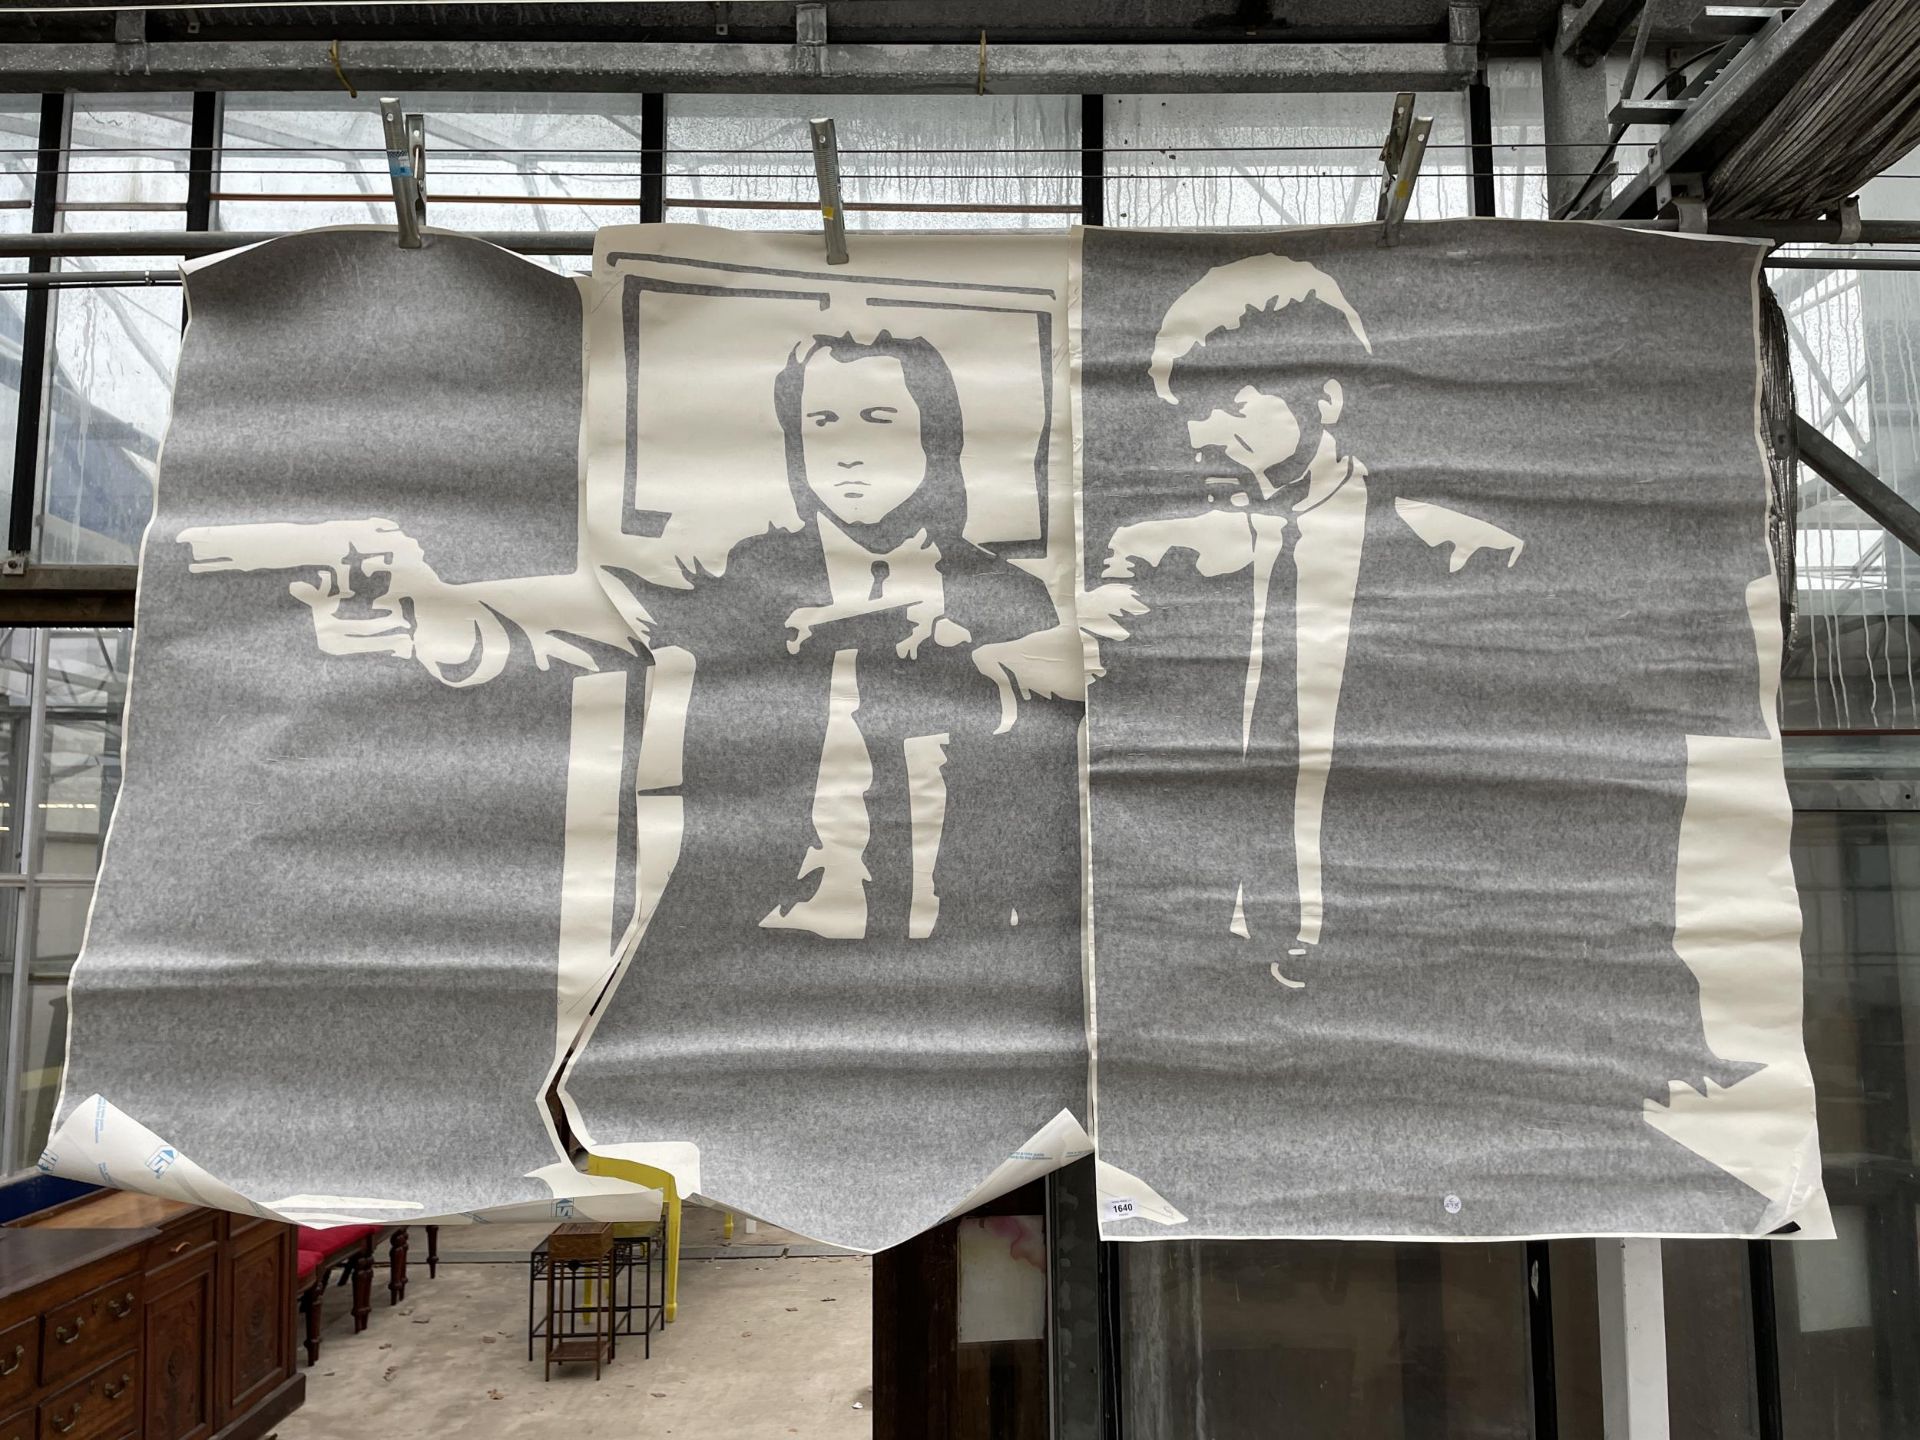 A LARGE 'PULP FICTION’ TRANSFER WALL ART POSTER - Image 2 of 4